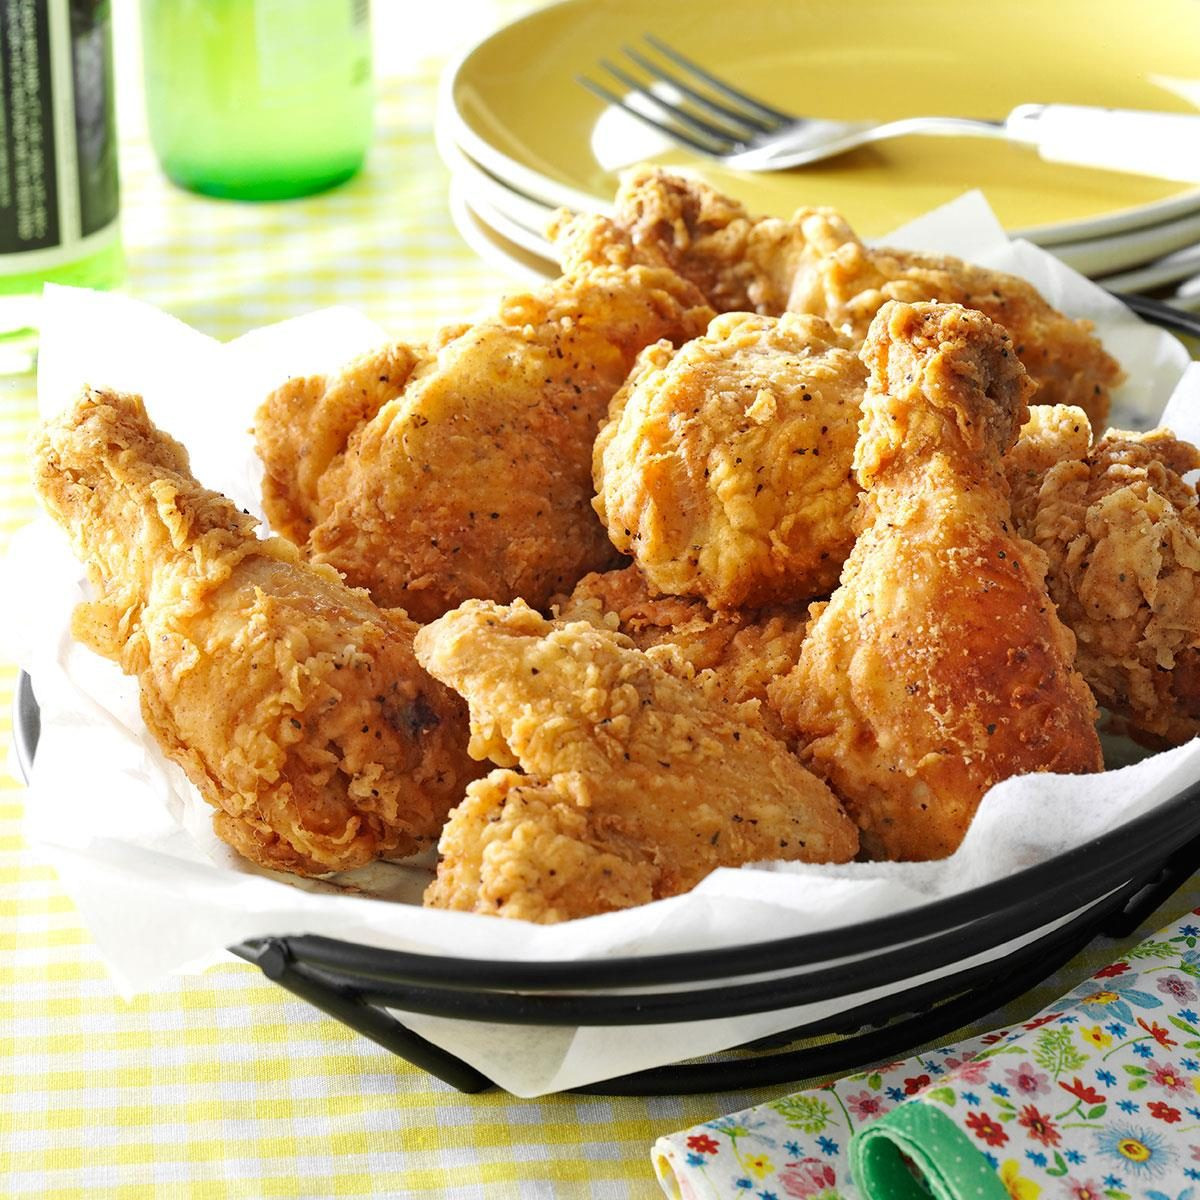 Recipes for Deep Fried Chicken Awesome Crispy Fried Chicken Recipe